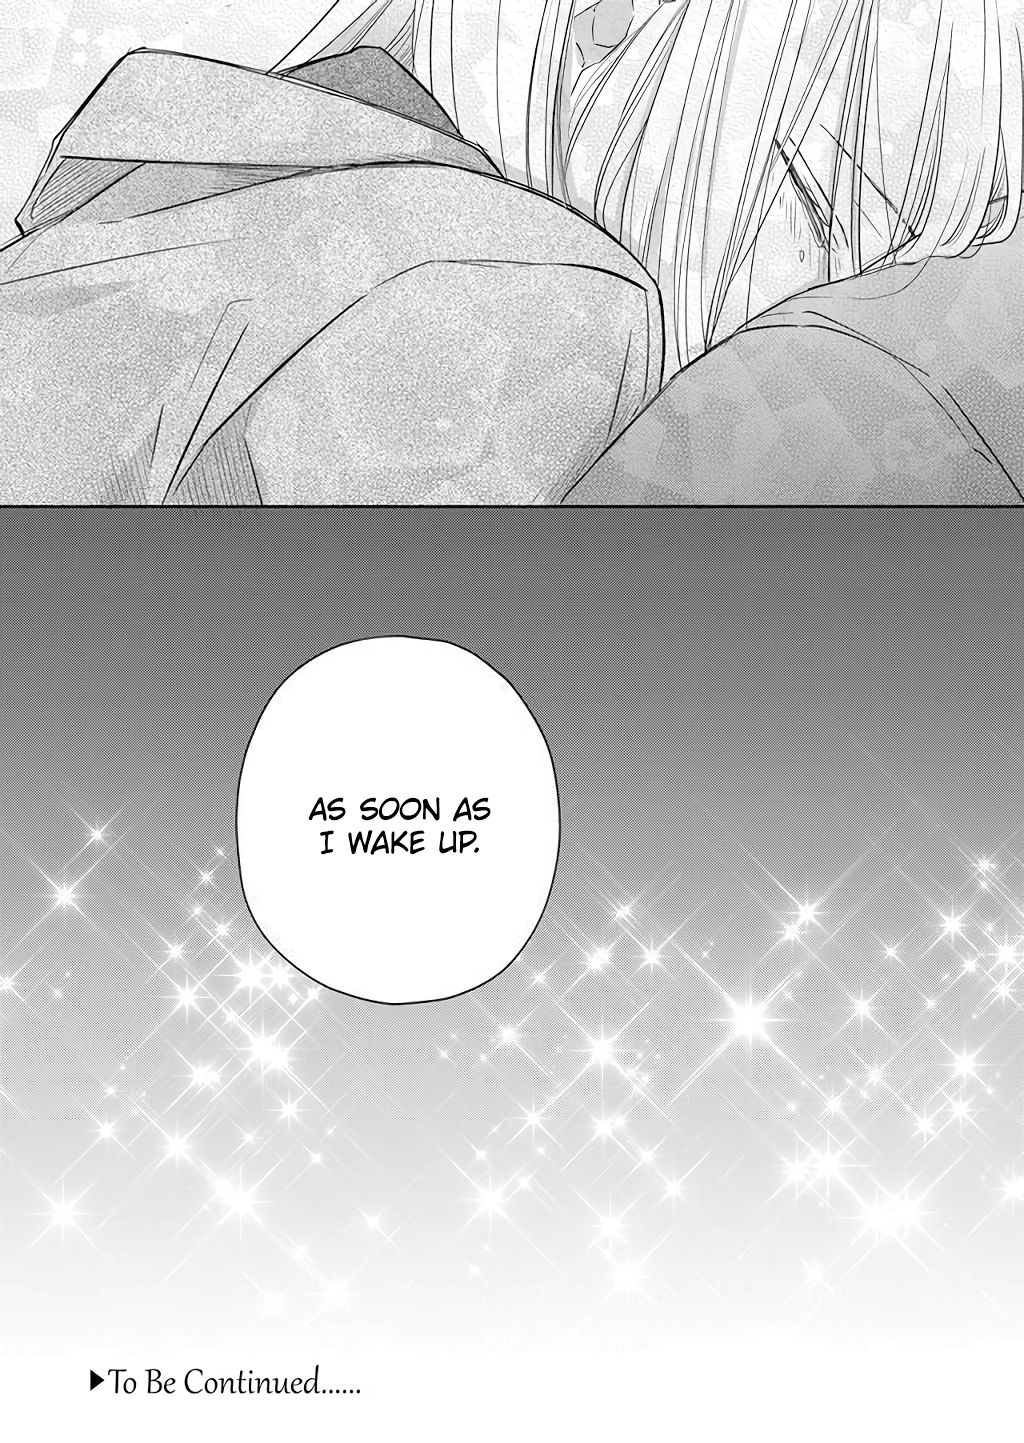 Heart on X: since manga panels are forbidden to share for My Love Story  with Yamada-kun at Lv999 heres a summary thread instead✌️ Chapter 99:  Official English license in mangamo, doing this